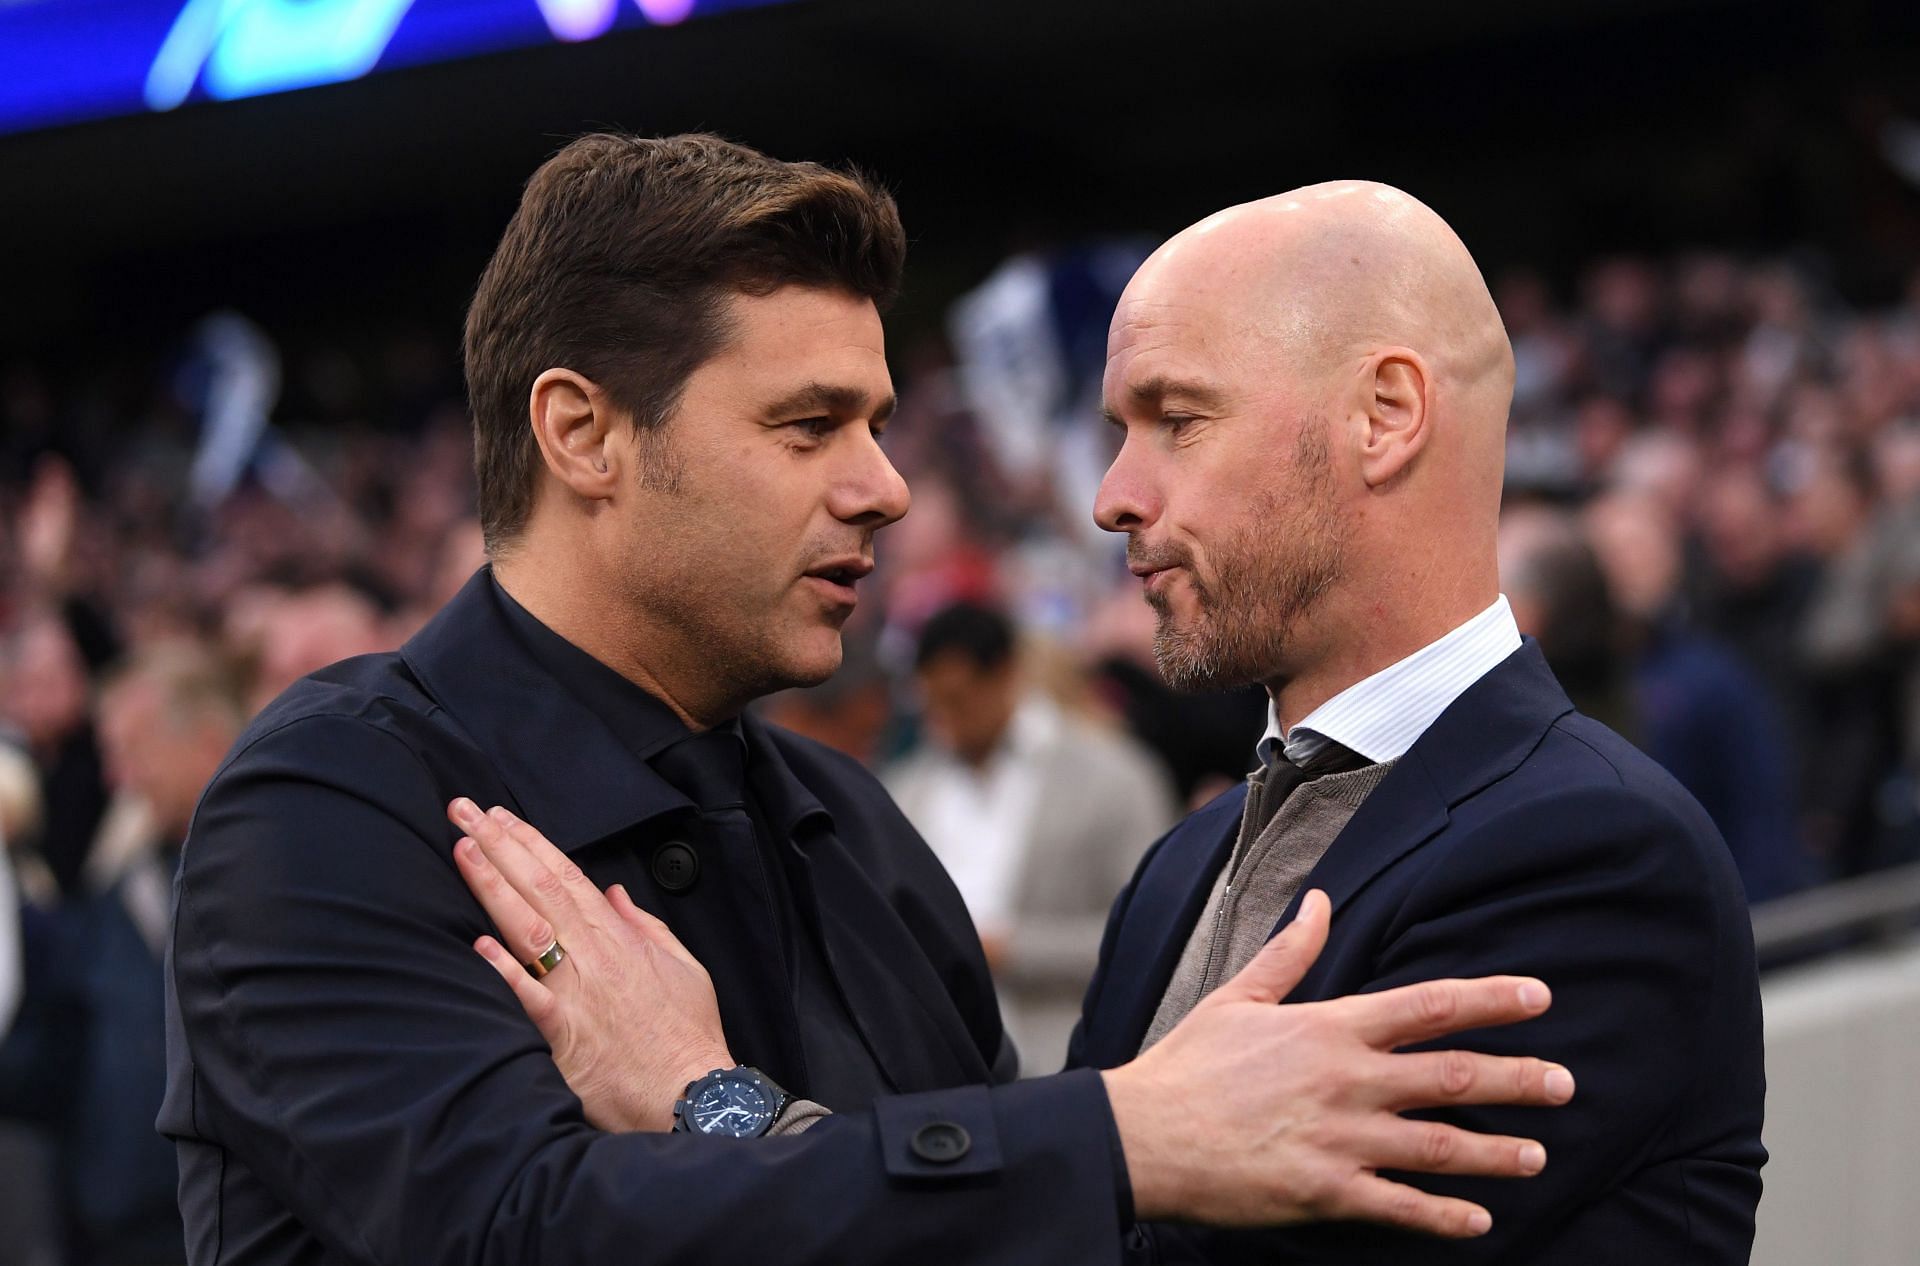 Pochettino (left) or Ten Hag (right) are likely to become to the next Red Devils boss